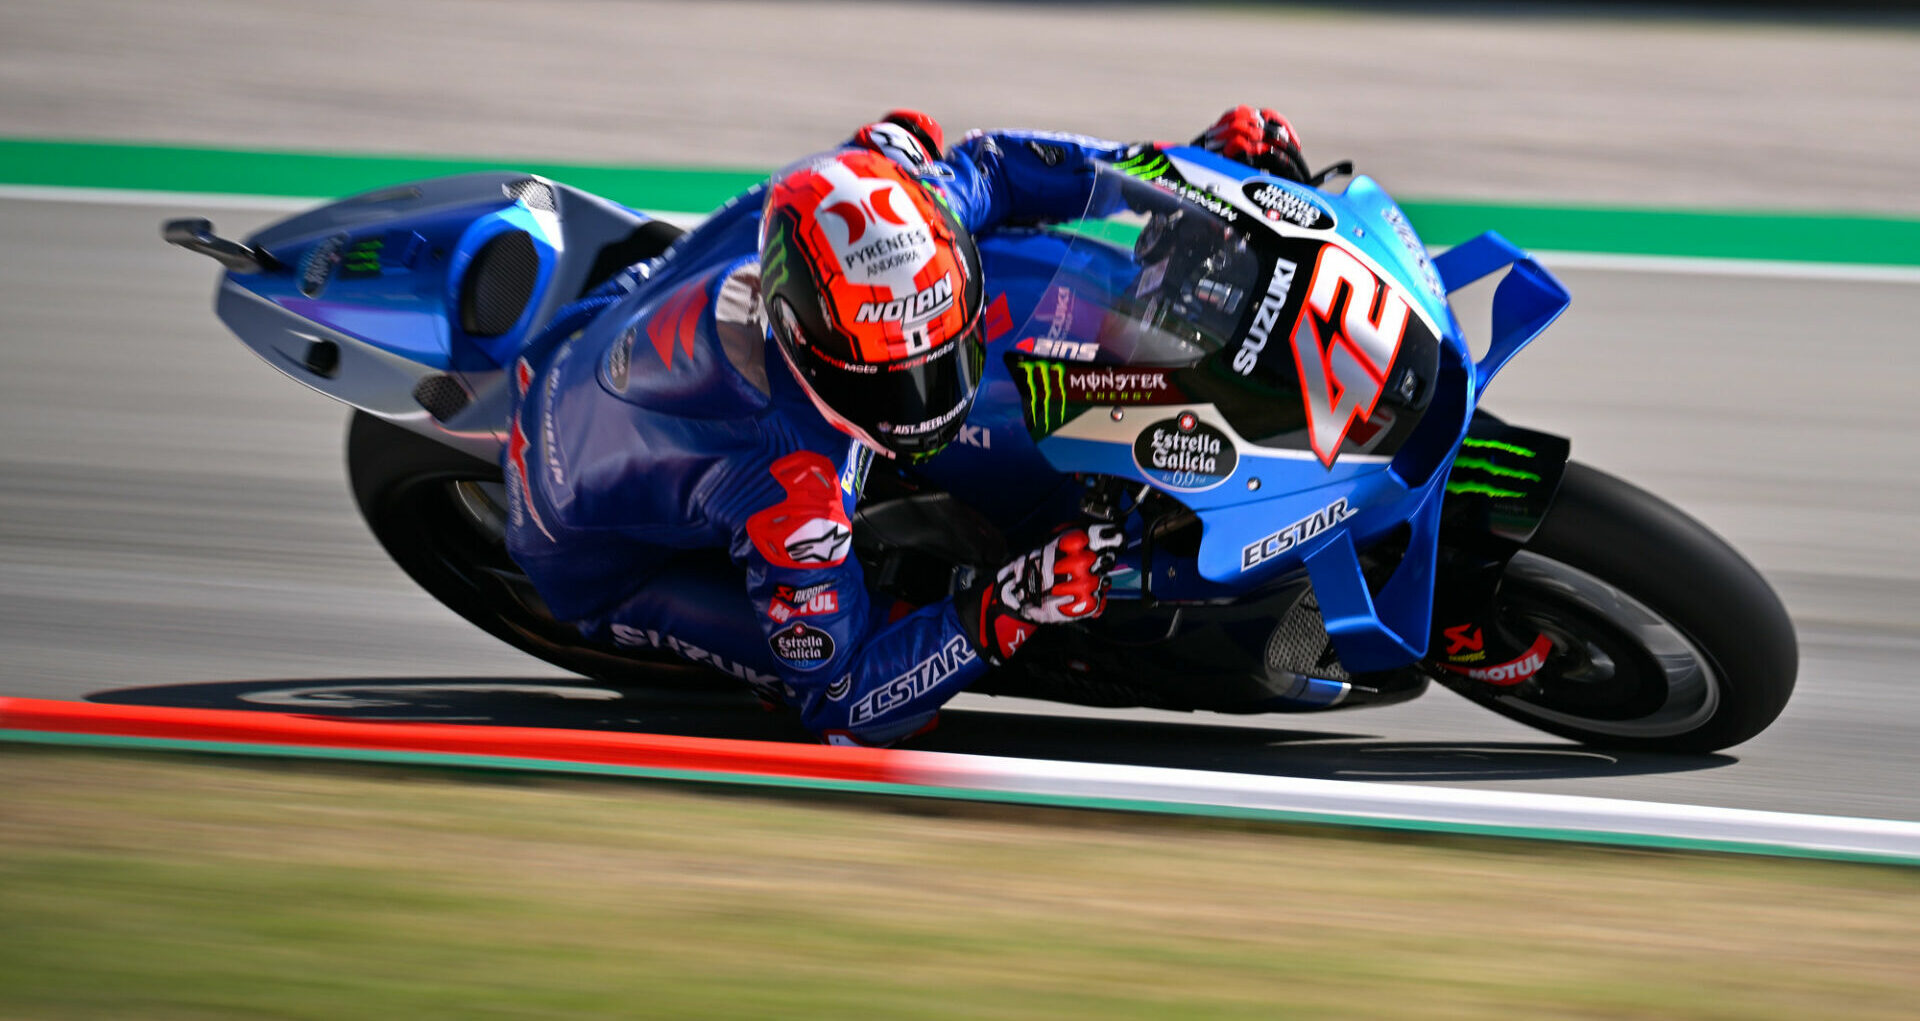 Alex Rins (42) in action at Catalunya. Photo by Kohei Hirota.